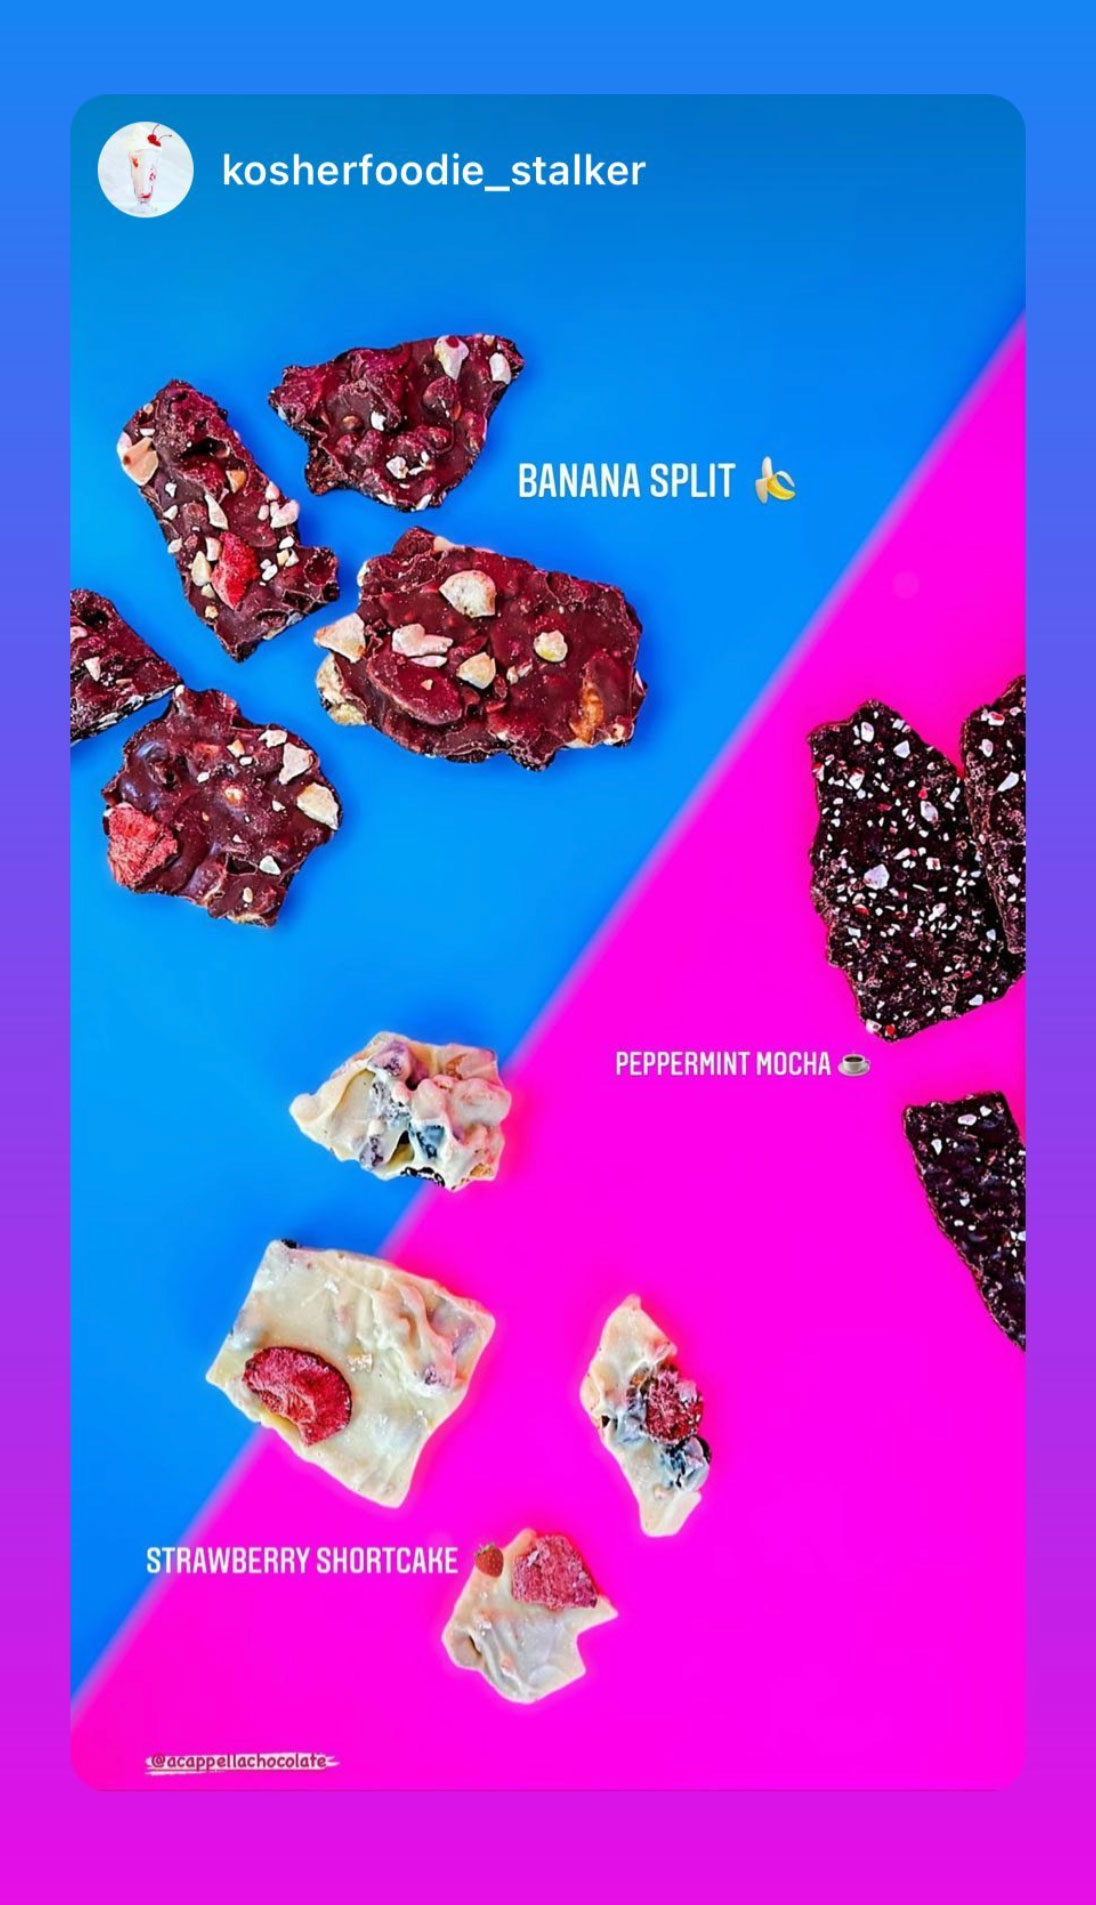 Instagram influencer's post about A'cappella Chocolate